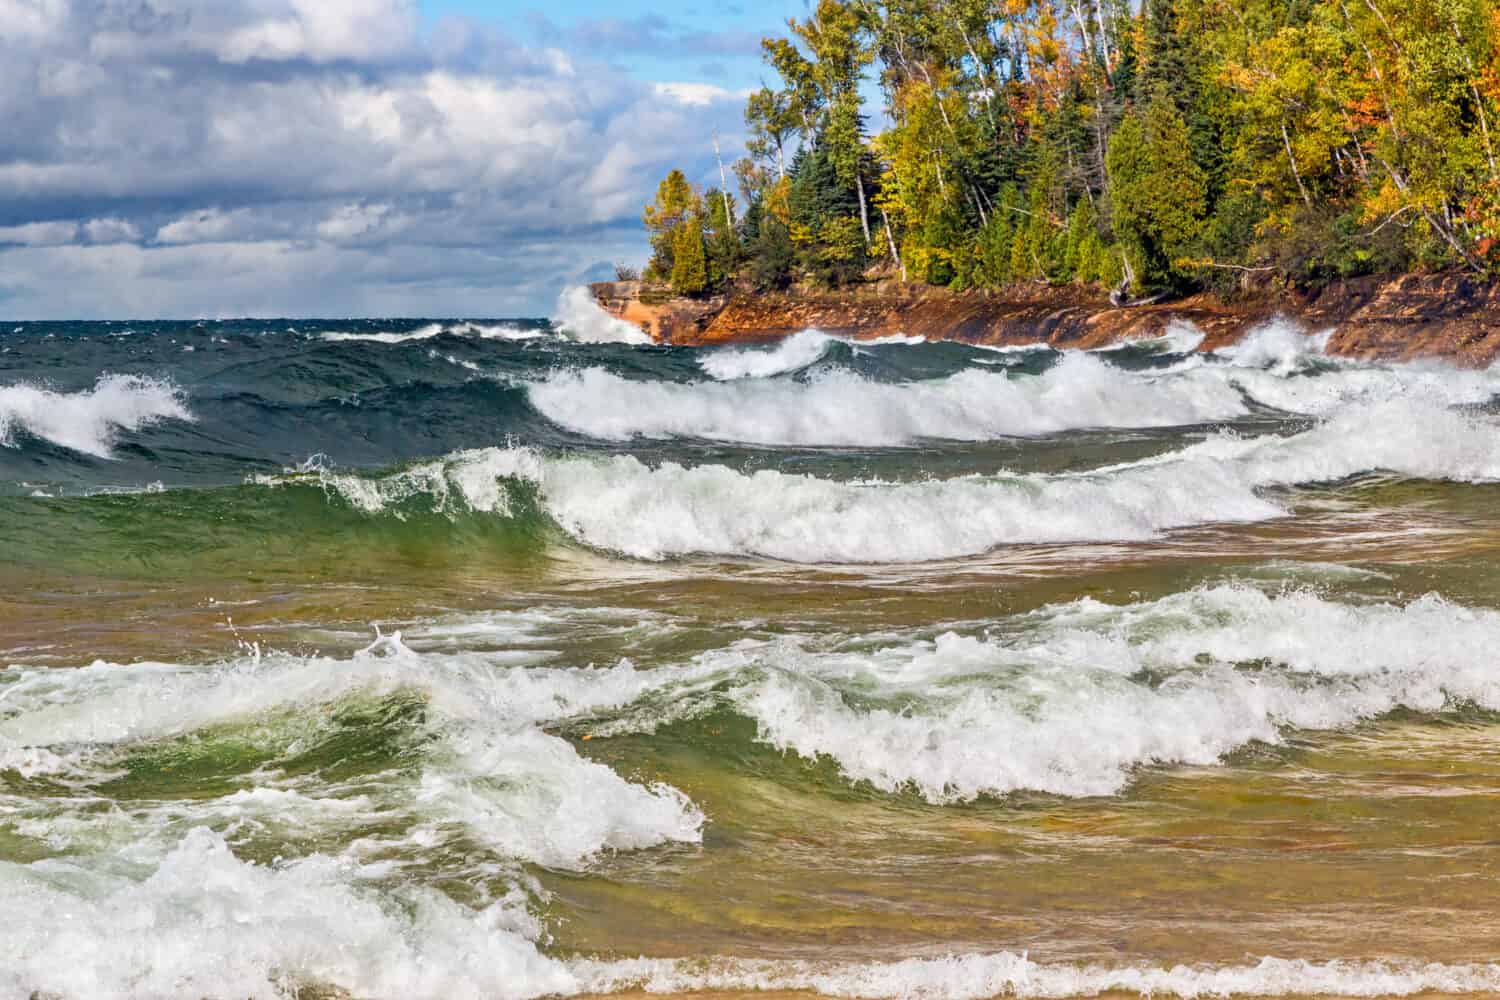 Waves crash on the rocky coast of Lake Superior at Michigan's Pictured Rocks National Lakeshore in autumn. Shot in Michigan's Upper Peninsula not far from Munising.